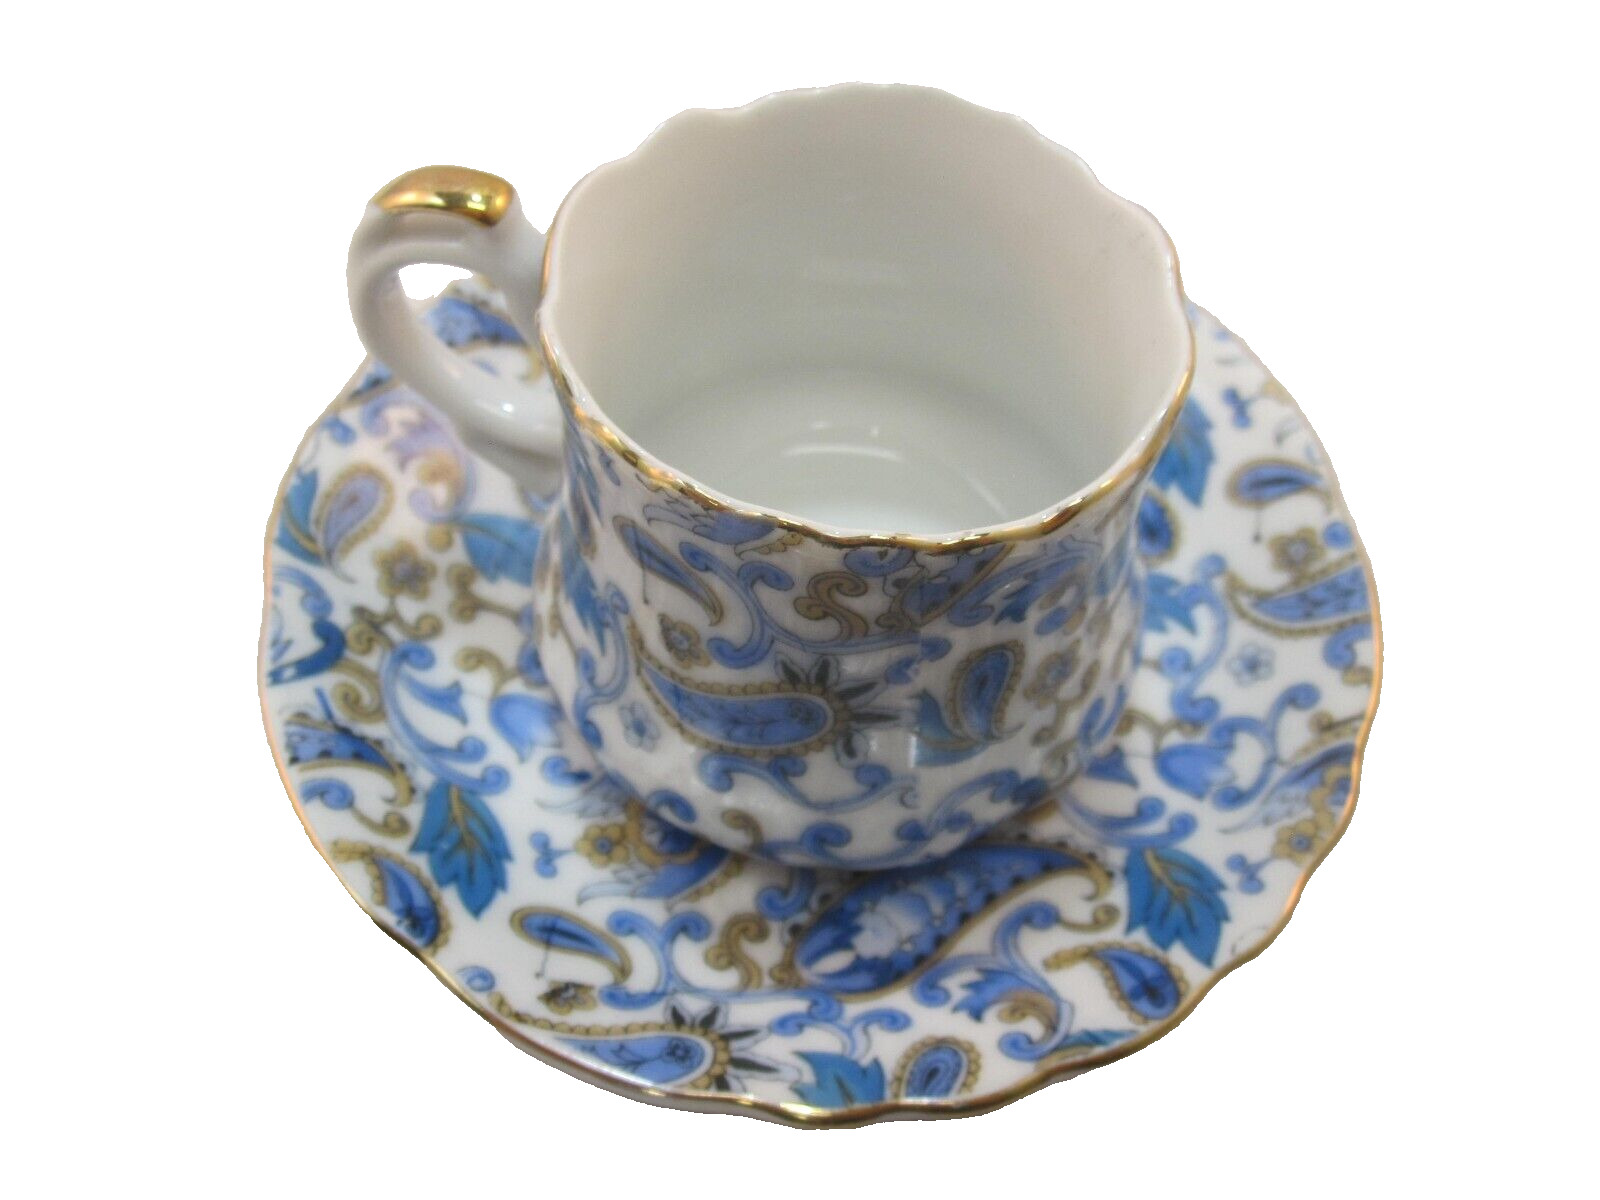 💕 LEFTON CHINA DEMITASSE CUP & SAUCER HAND PAINTED BLUE PAISLEY 30 AVAIL  3PT8